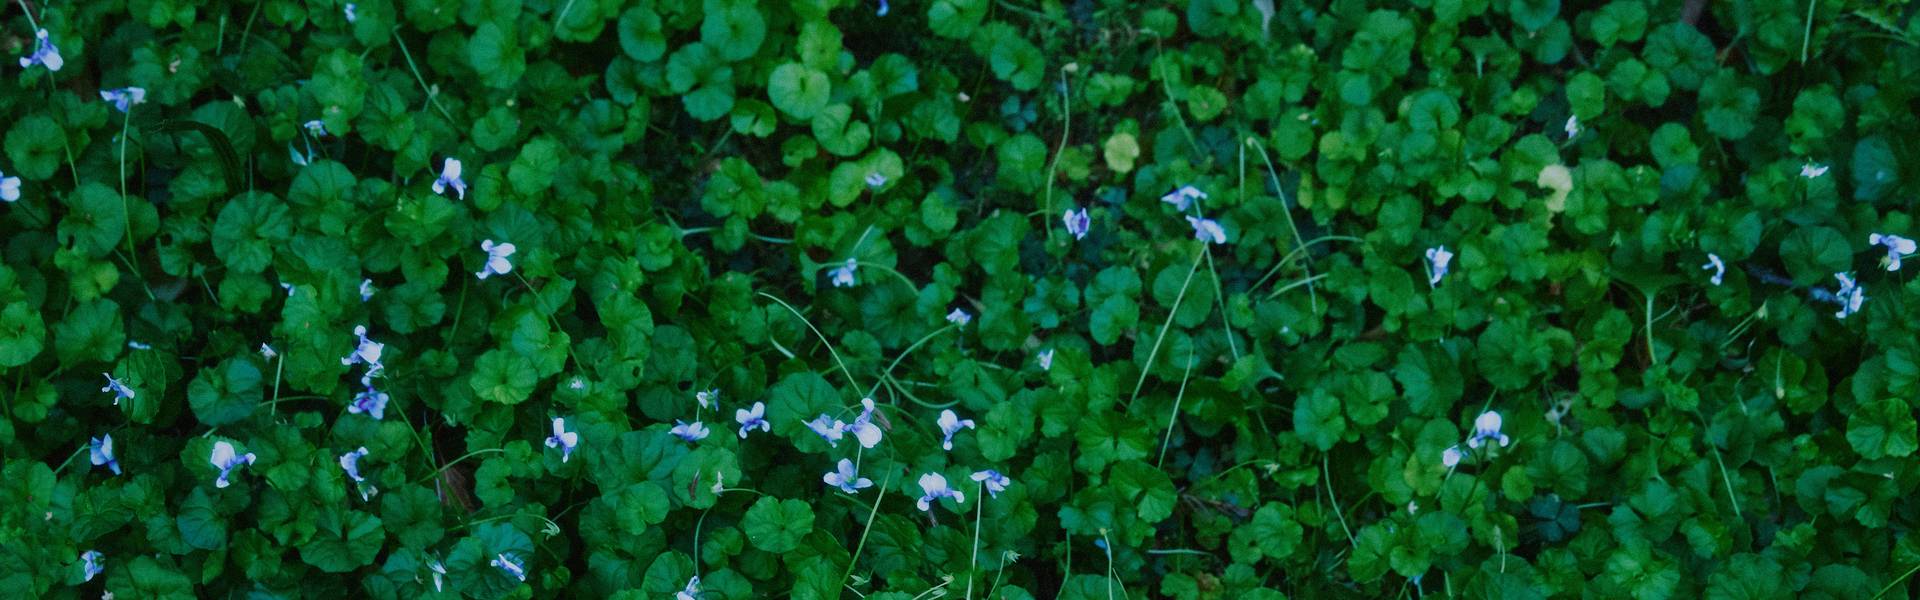 Field of small green leaves and blue flowers | About Kinship